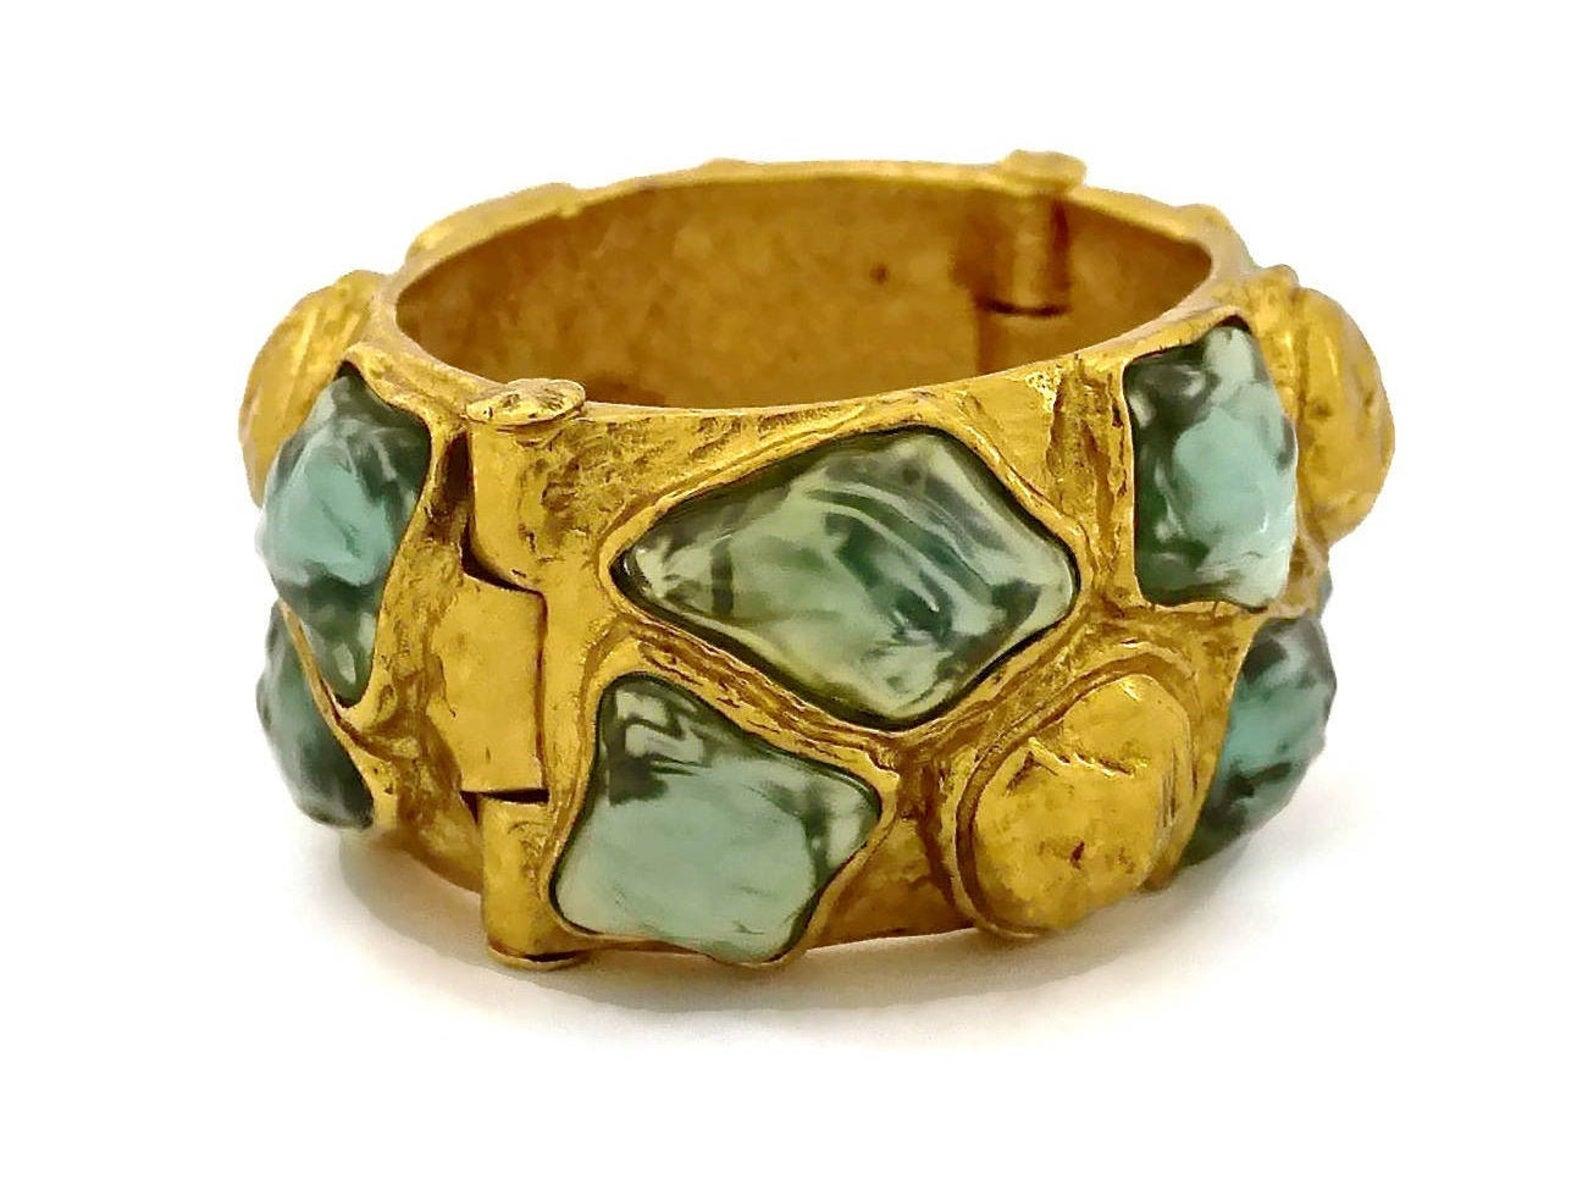 Vintage YVES SAINT LAURENT Ysl by Robert Goossens Cabochon Studded Cuff Bracelet

Measurements:
Height: 1.38 inches (3.5 cm)
Circumference: 6.45 inches (16.5 cm)
Thickness: 0.55 inch (1.4 cm)

Features:
- 100% Authentic YVES SAINT LAURENT by Robert